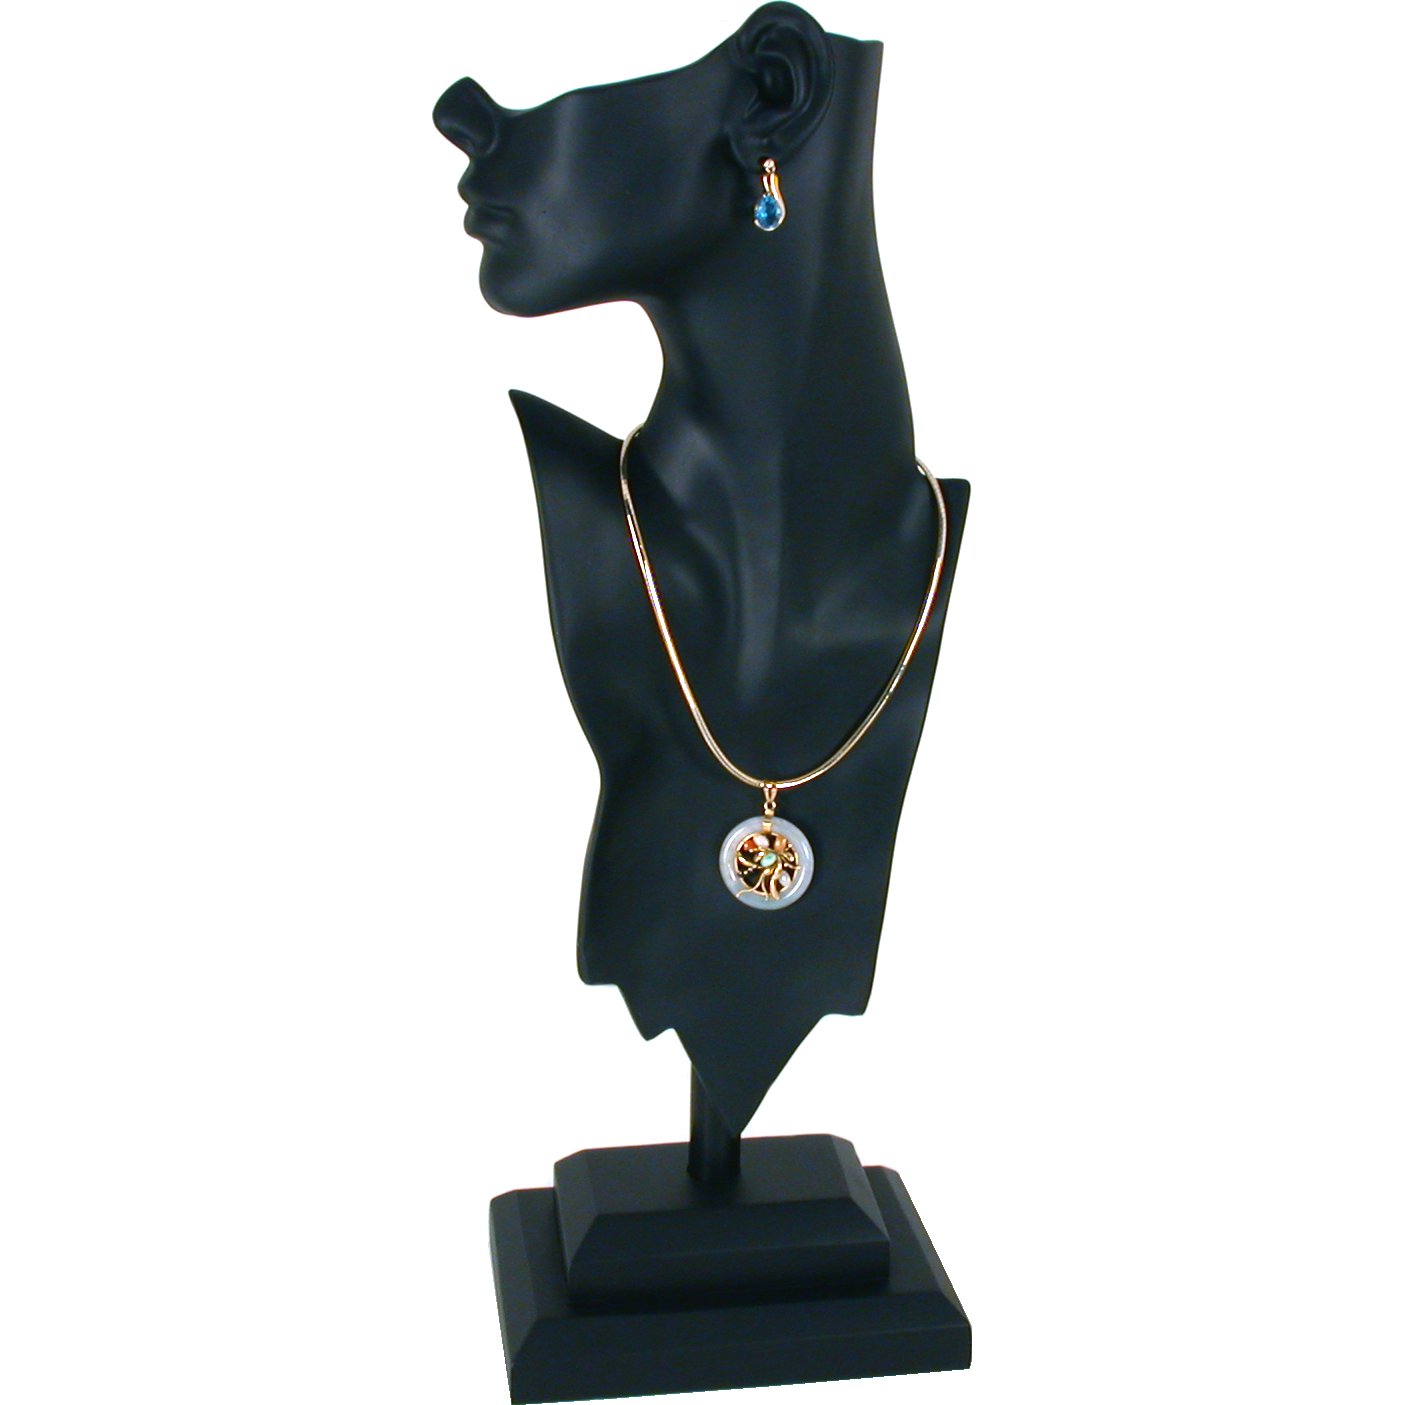 Black Earring Necklace Pendant Display Jewelry Stand